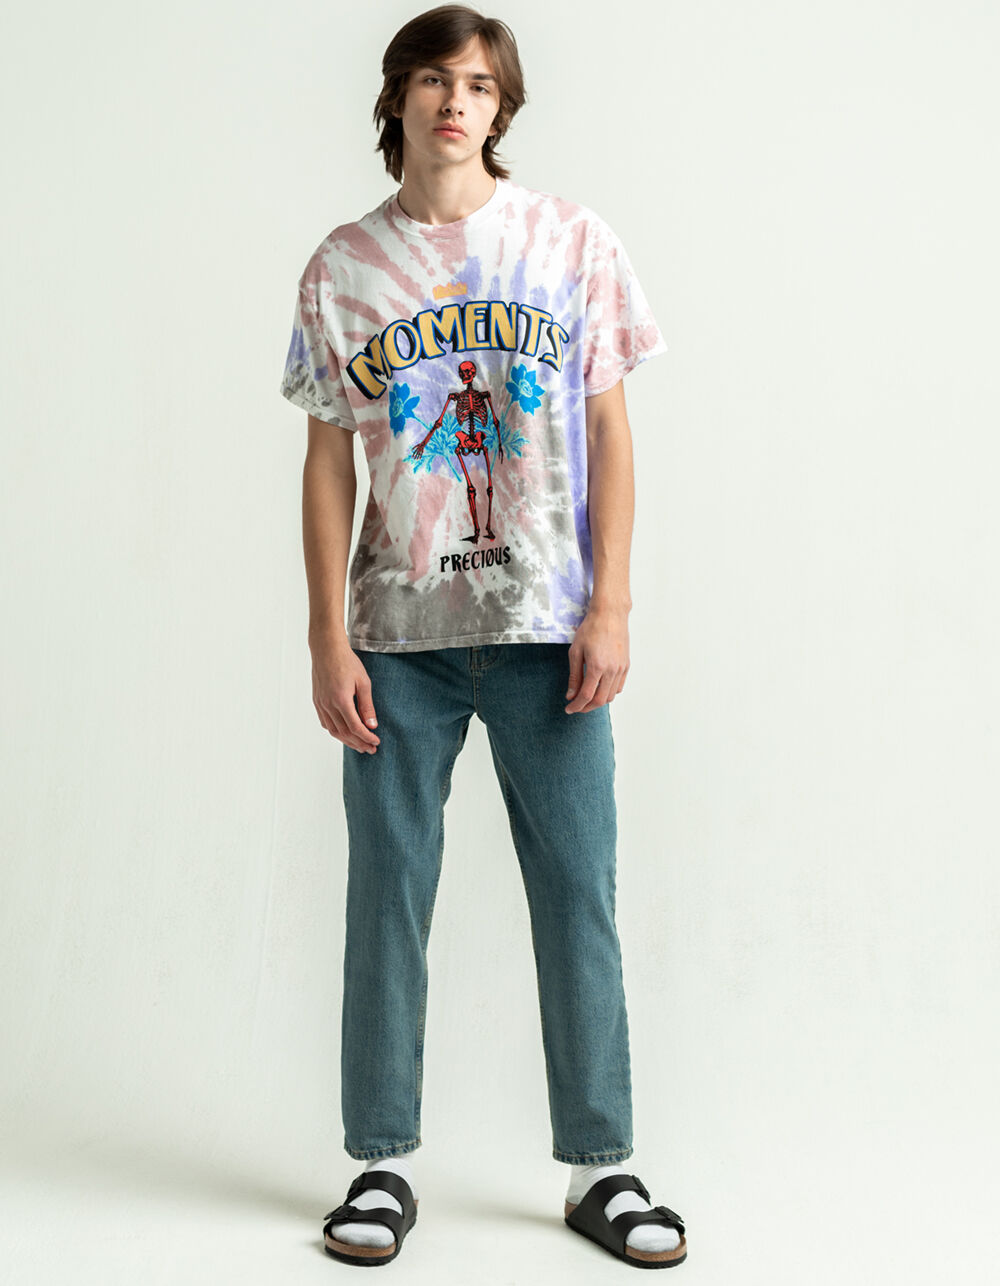 Urban Outfitters Men's T-Shirt - Multi - M